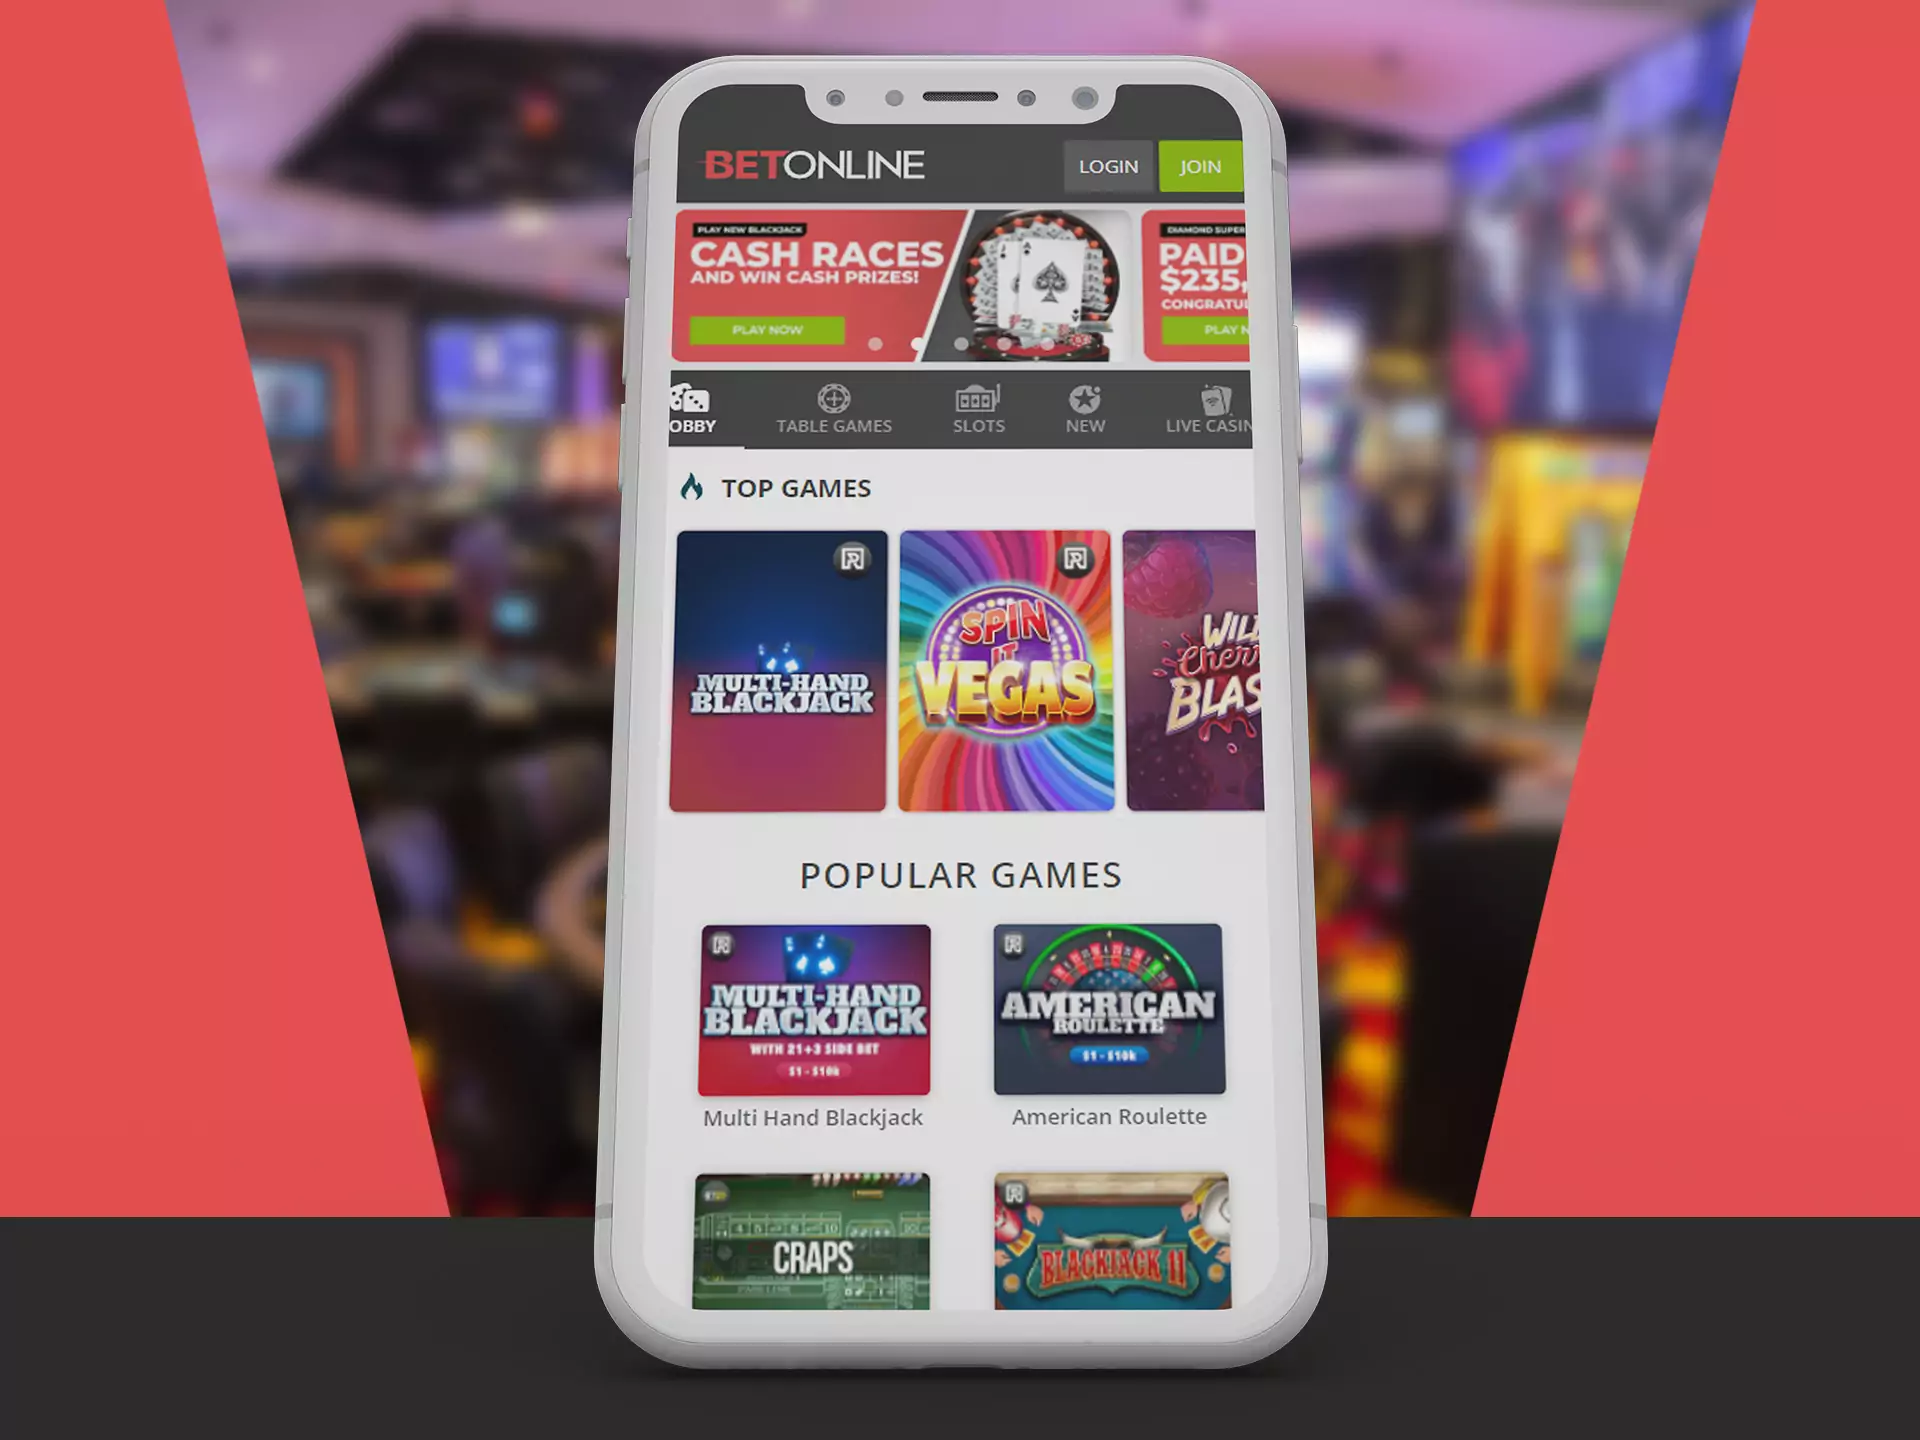 You can play online casino games in the Betonline app.